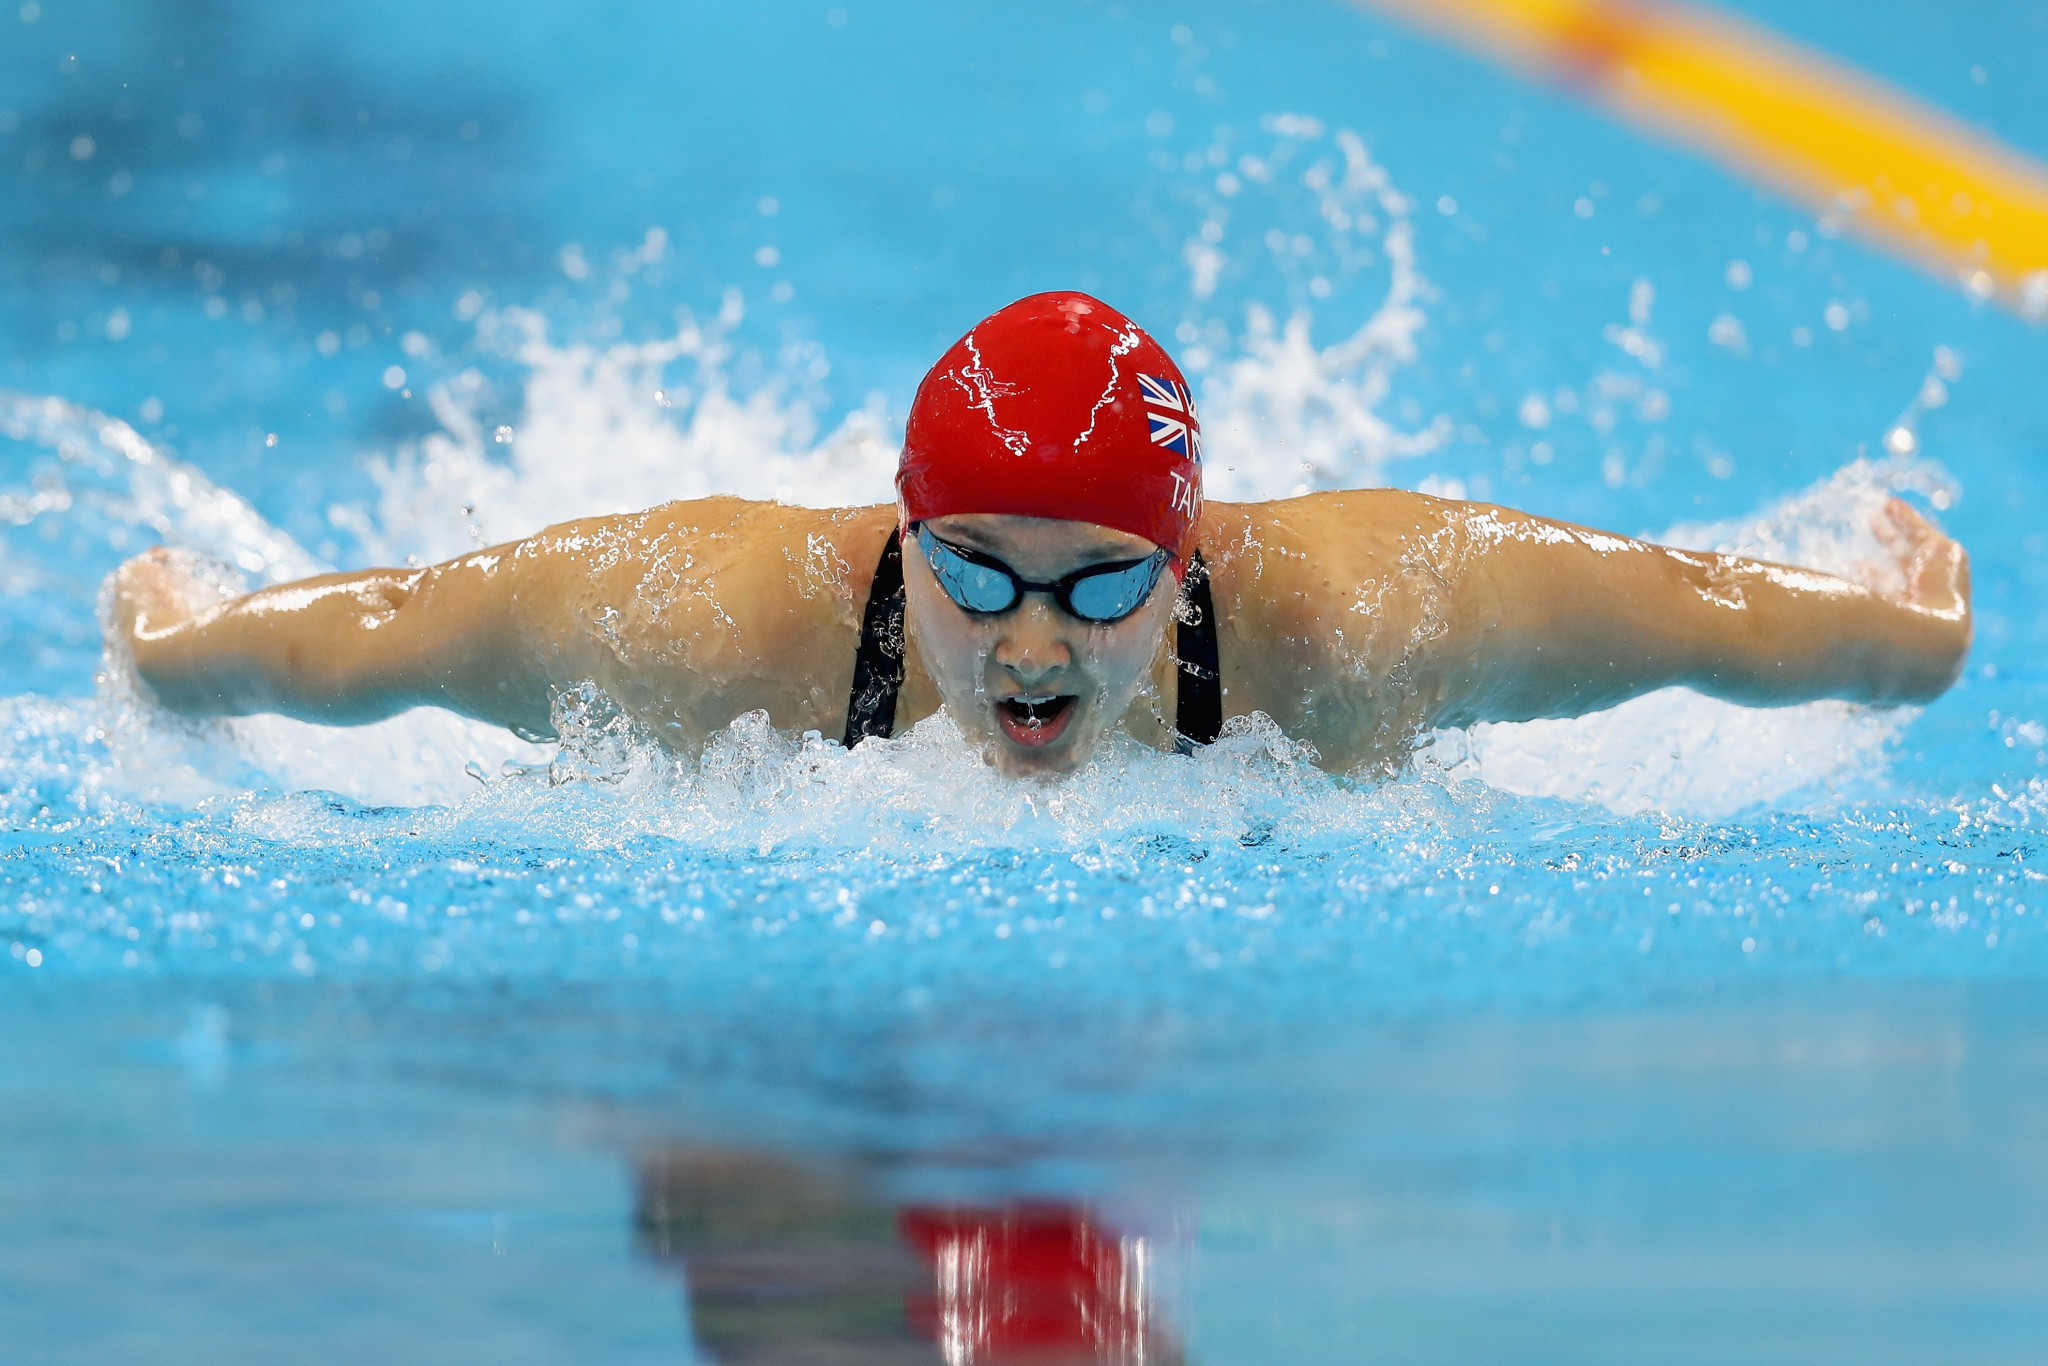 Britain's Alice Tai will hope to repeat her success at the World Para Swimming World Series in Berlin, Germany, having claimed four gold medals in Lignano Sabbiadoro last week ©Paralympics GB